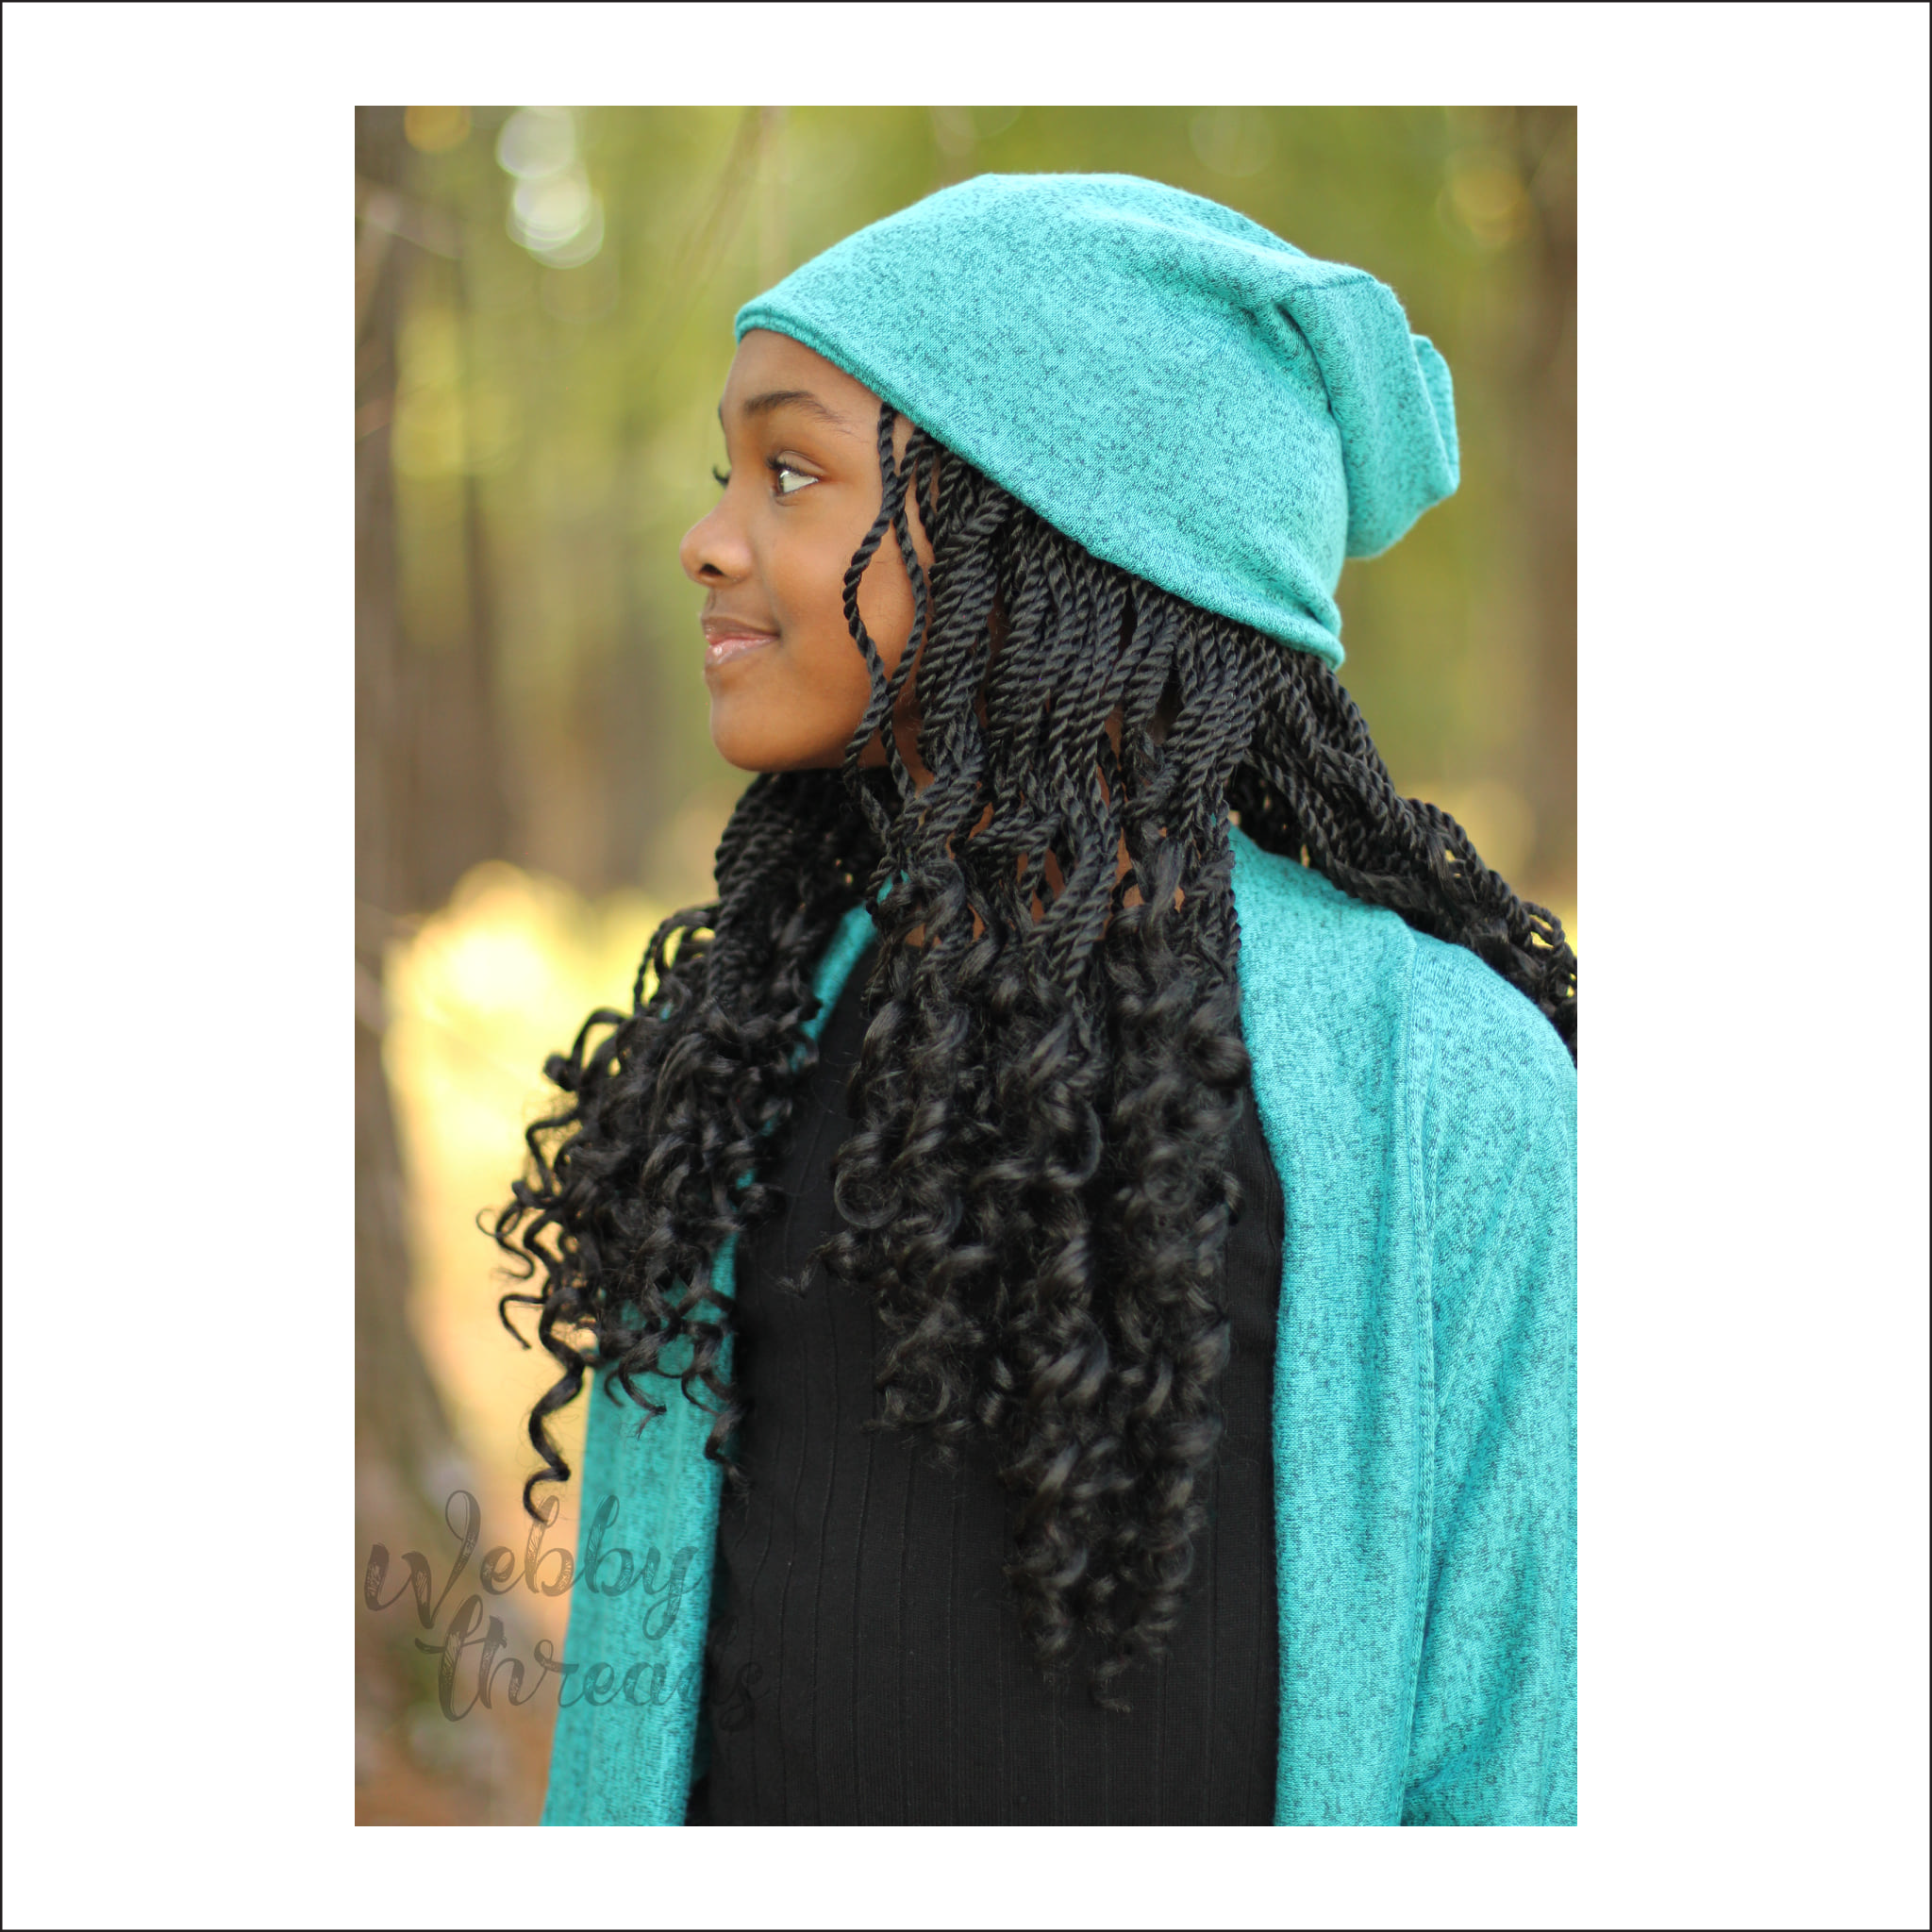 Double-thick Reversible Beanie - FREE PDF PATTERN